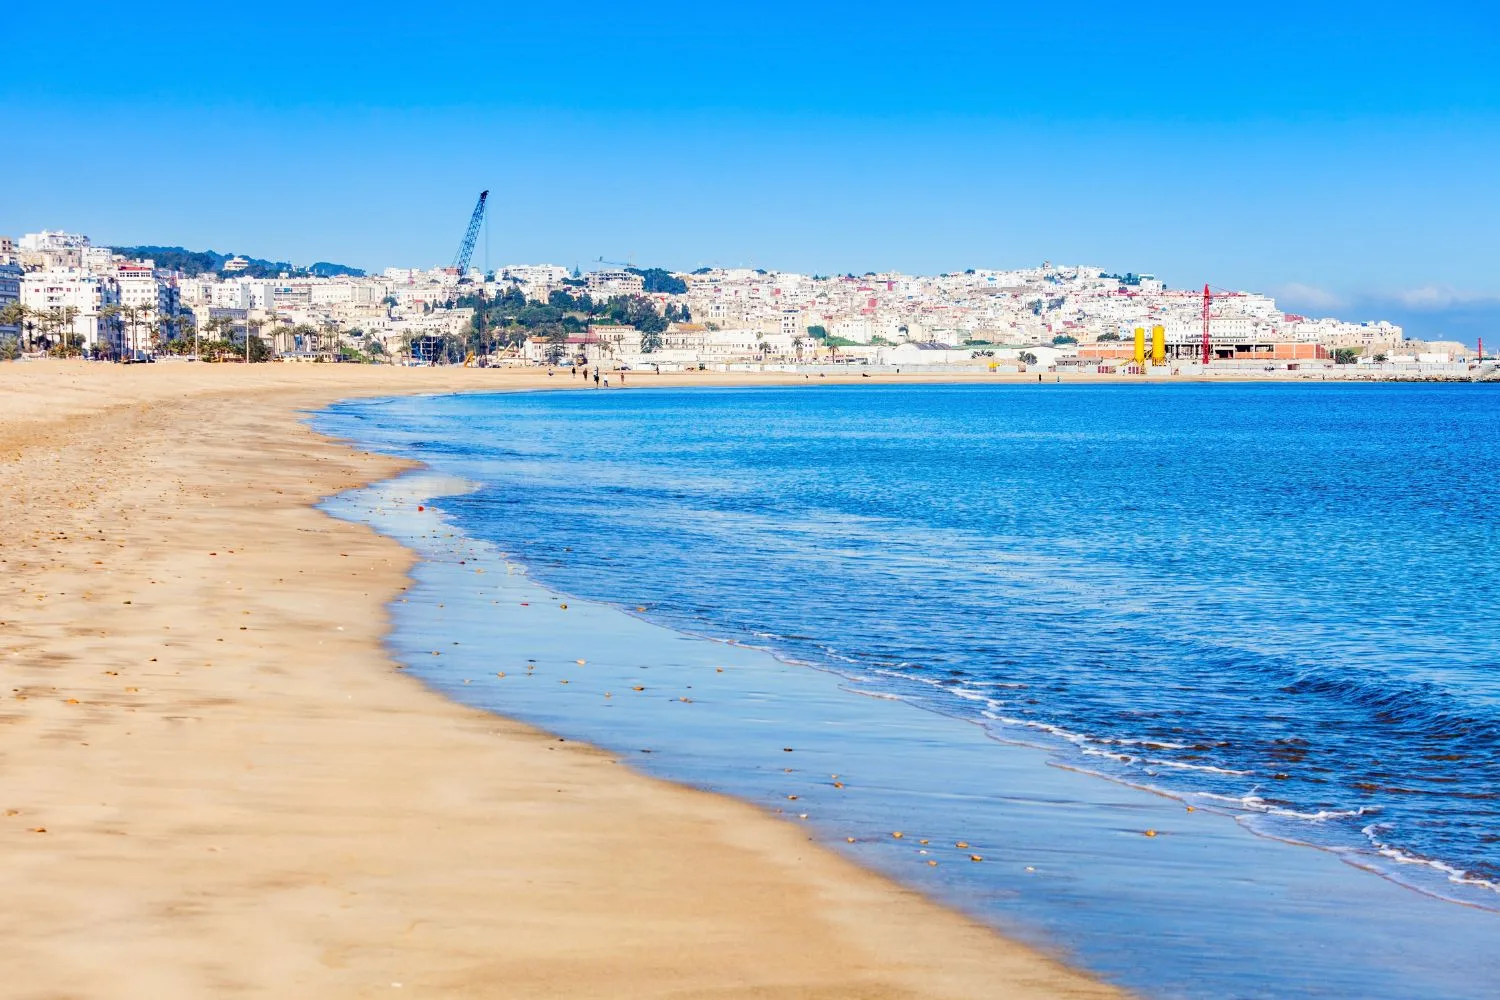 View of the Tangier city beach on a sunny day